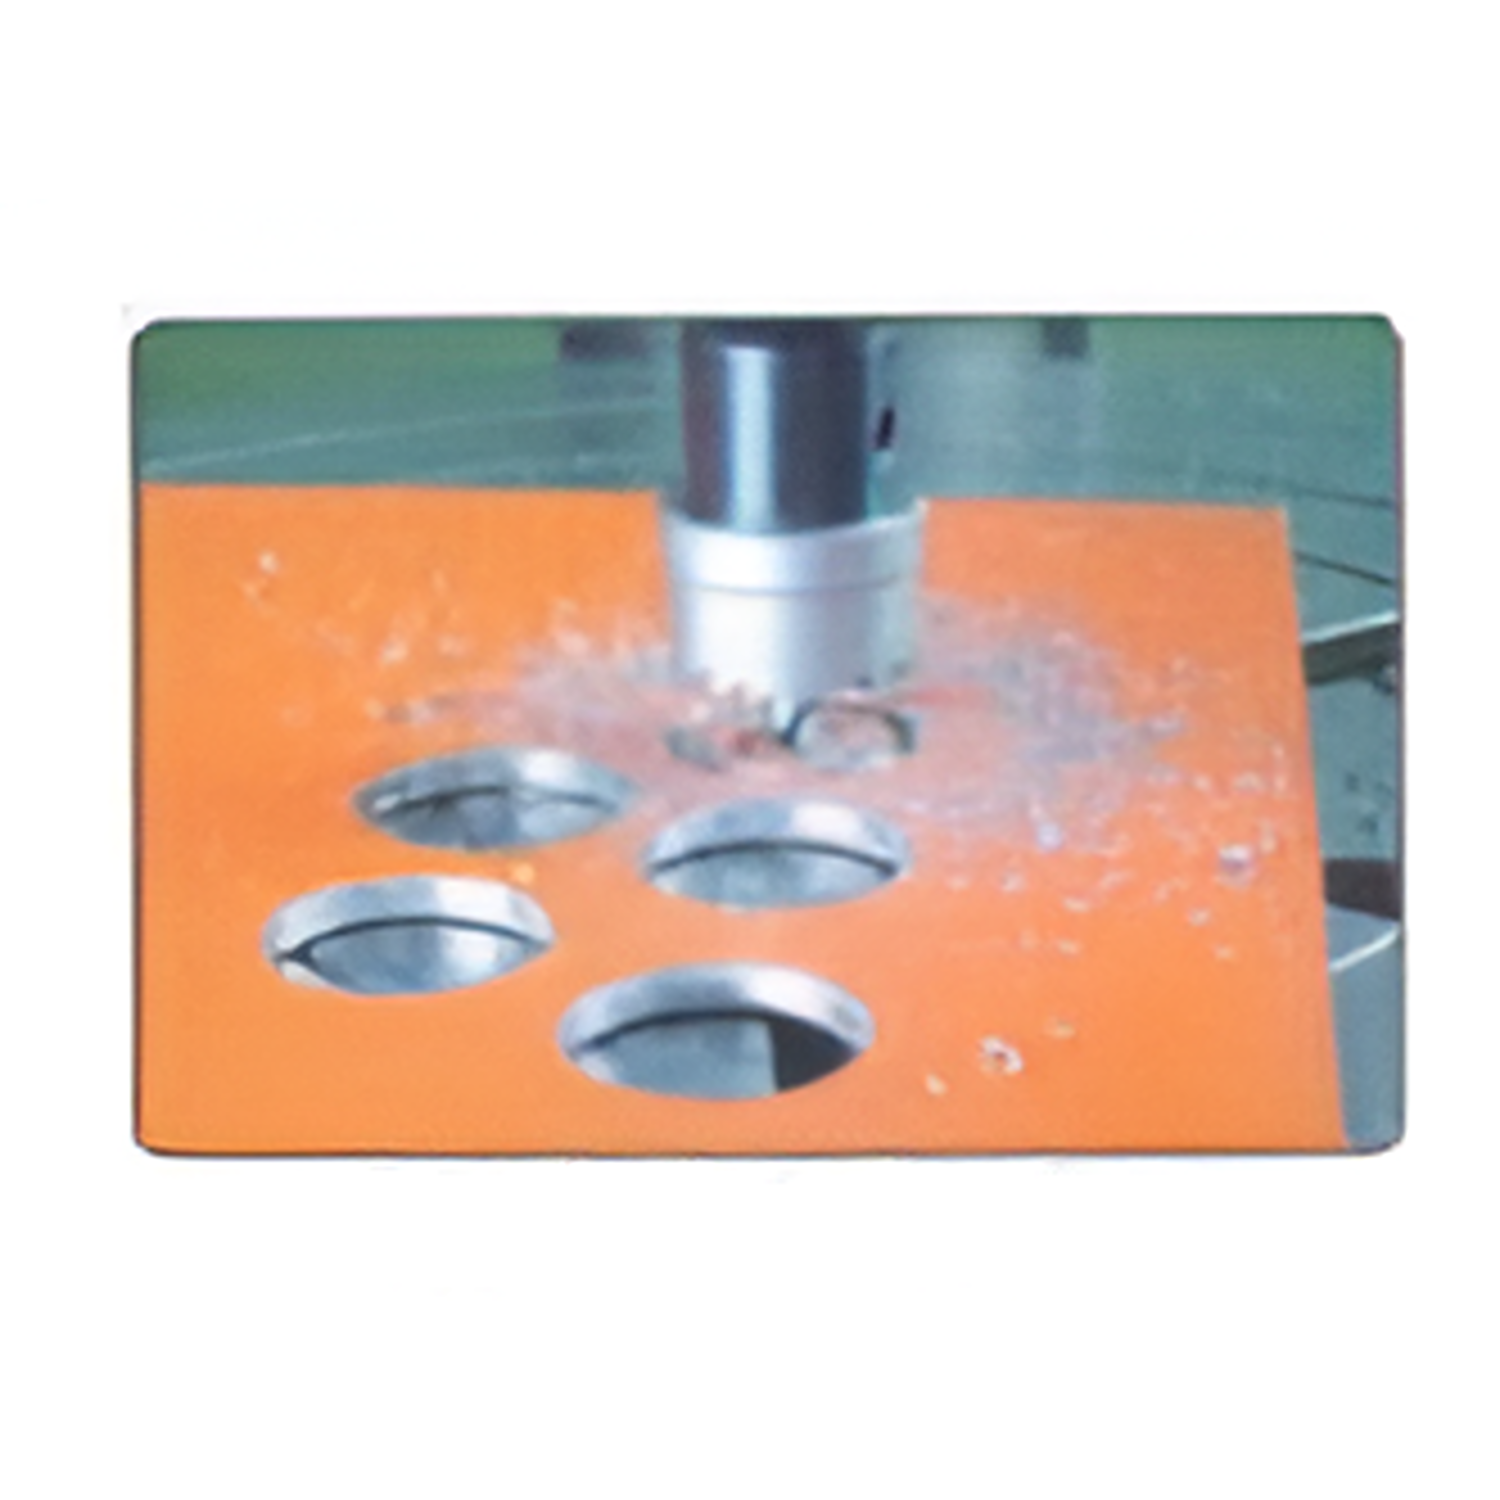 YEW AIK AE00701 Hole Saw For Tough Drilling On 1.6mm - Premium Hole Saw from YEW AIK - Shop now at Yew Aik.